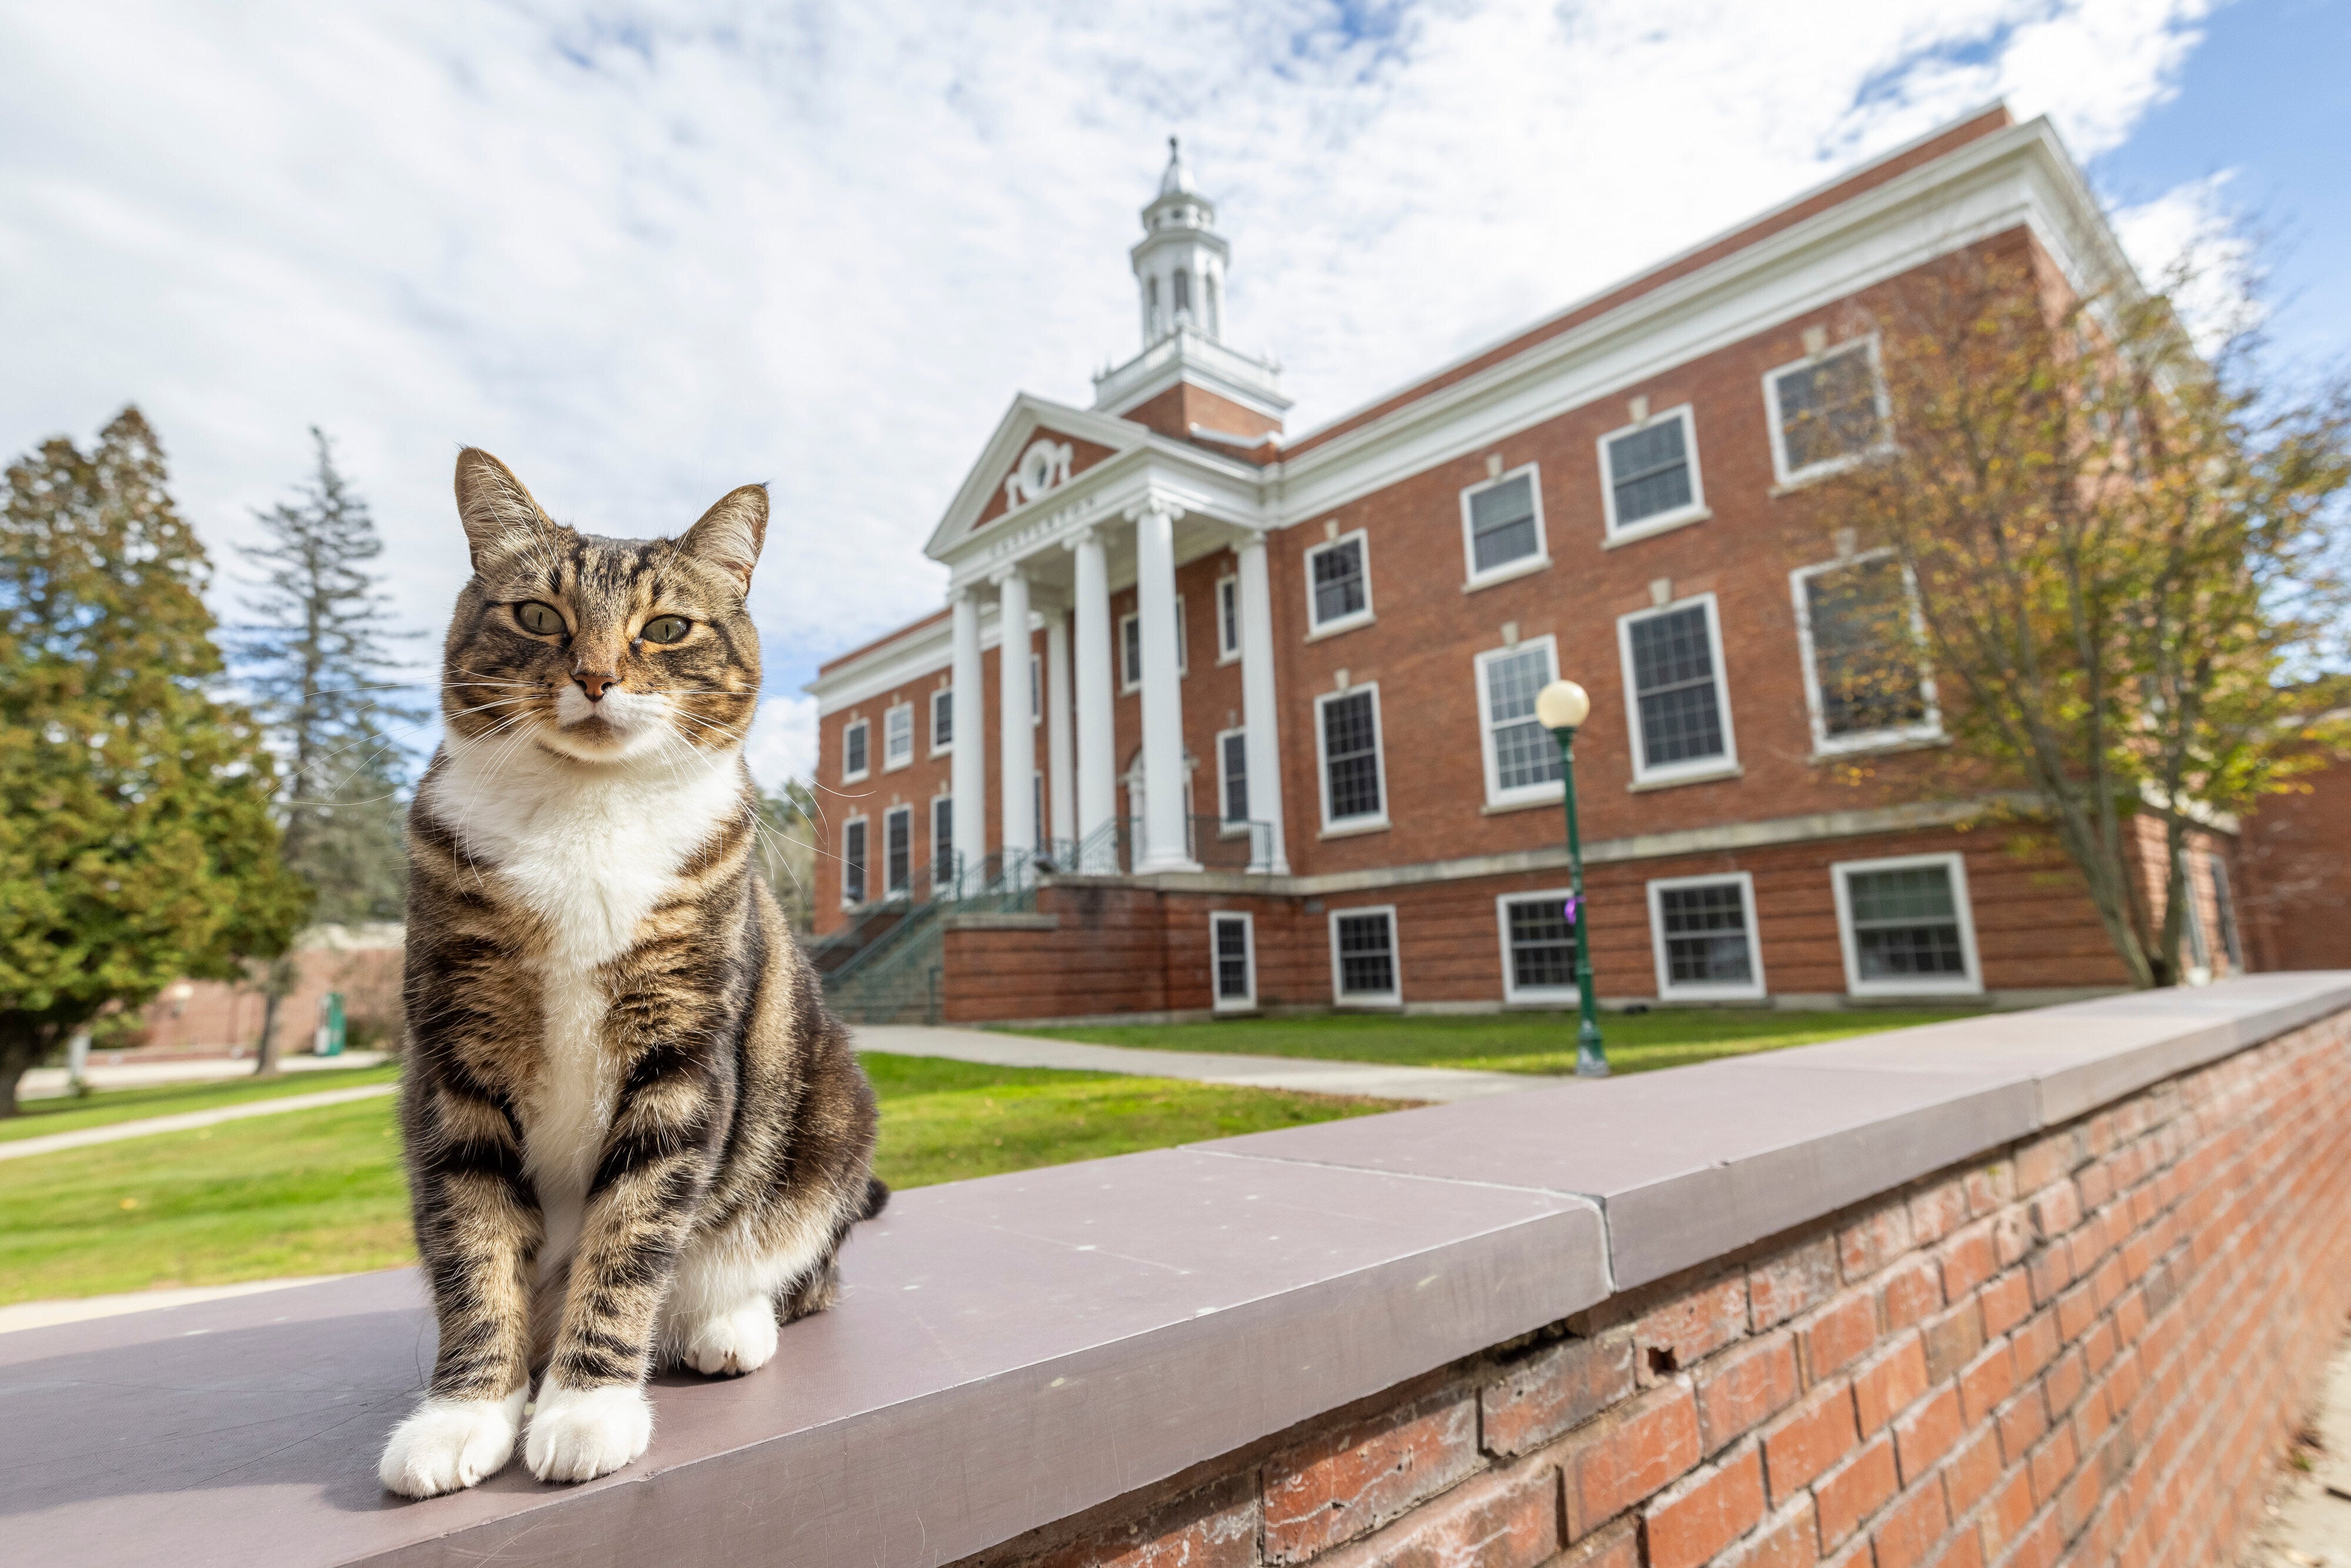 Max the Cat stands in front of Woodruff Hall at Vermont State University Castleton on on 12 October, 2023 in Castleton, Vermont. He received an honorary degree from the university for being a beloved member of the college community